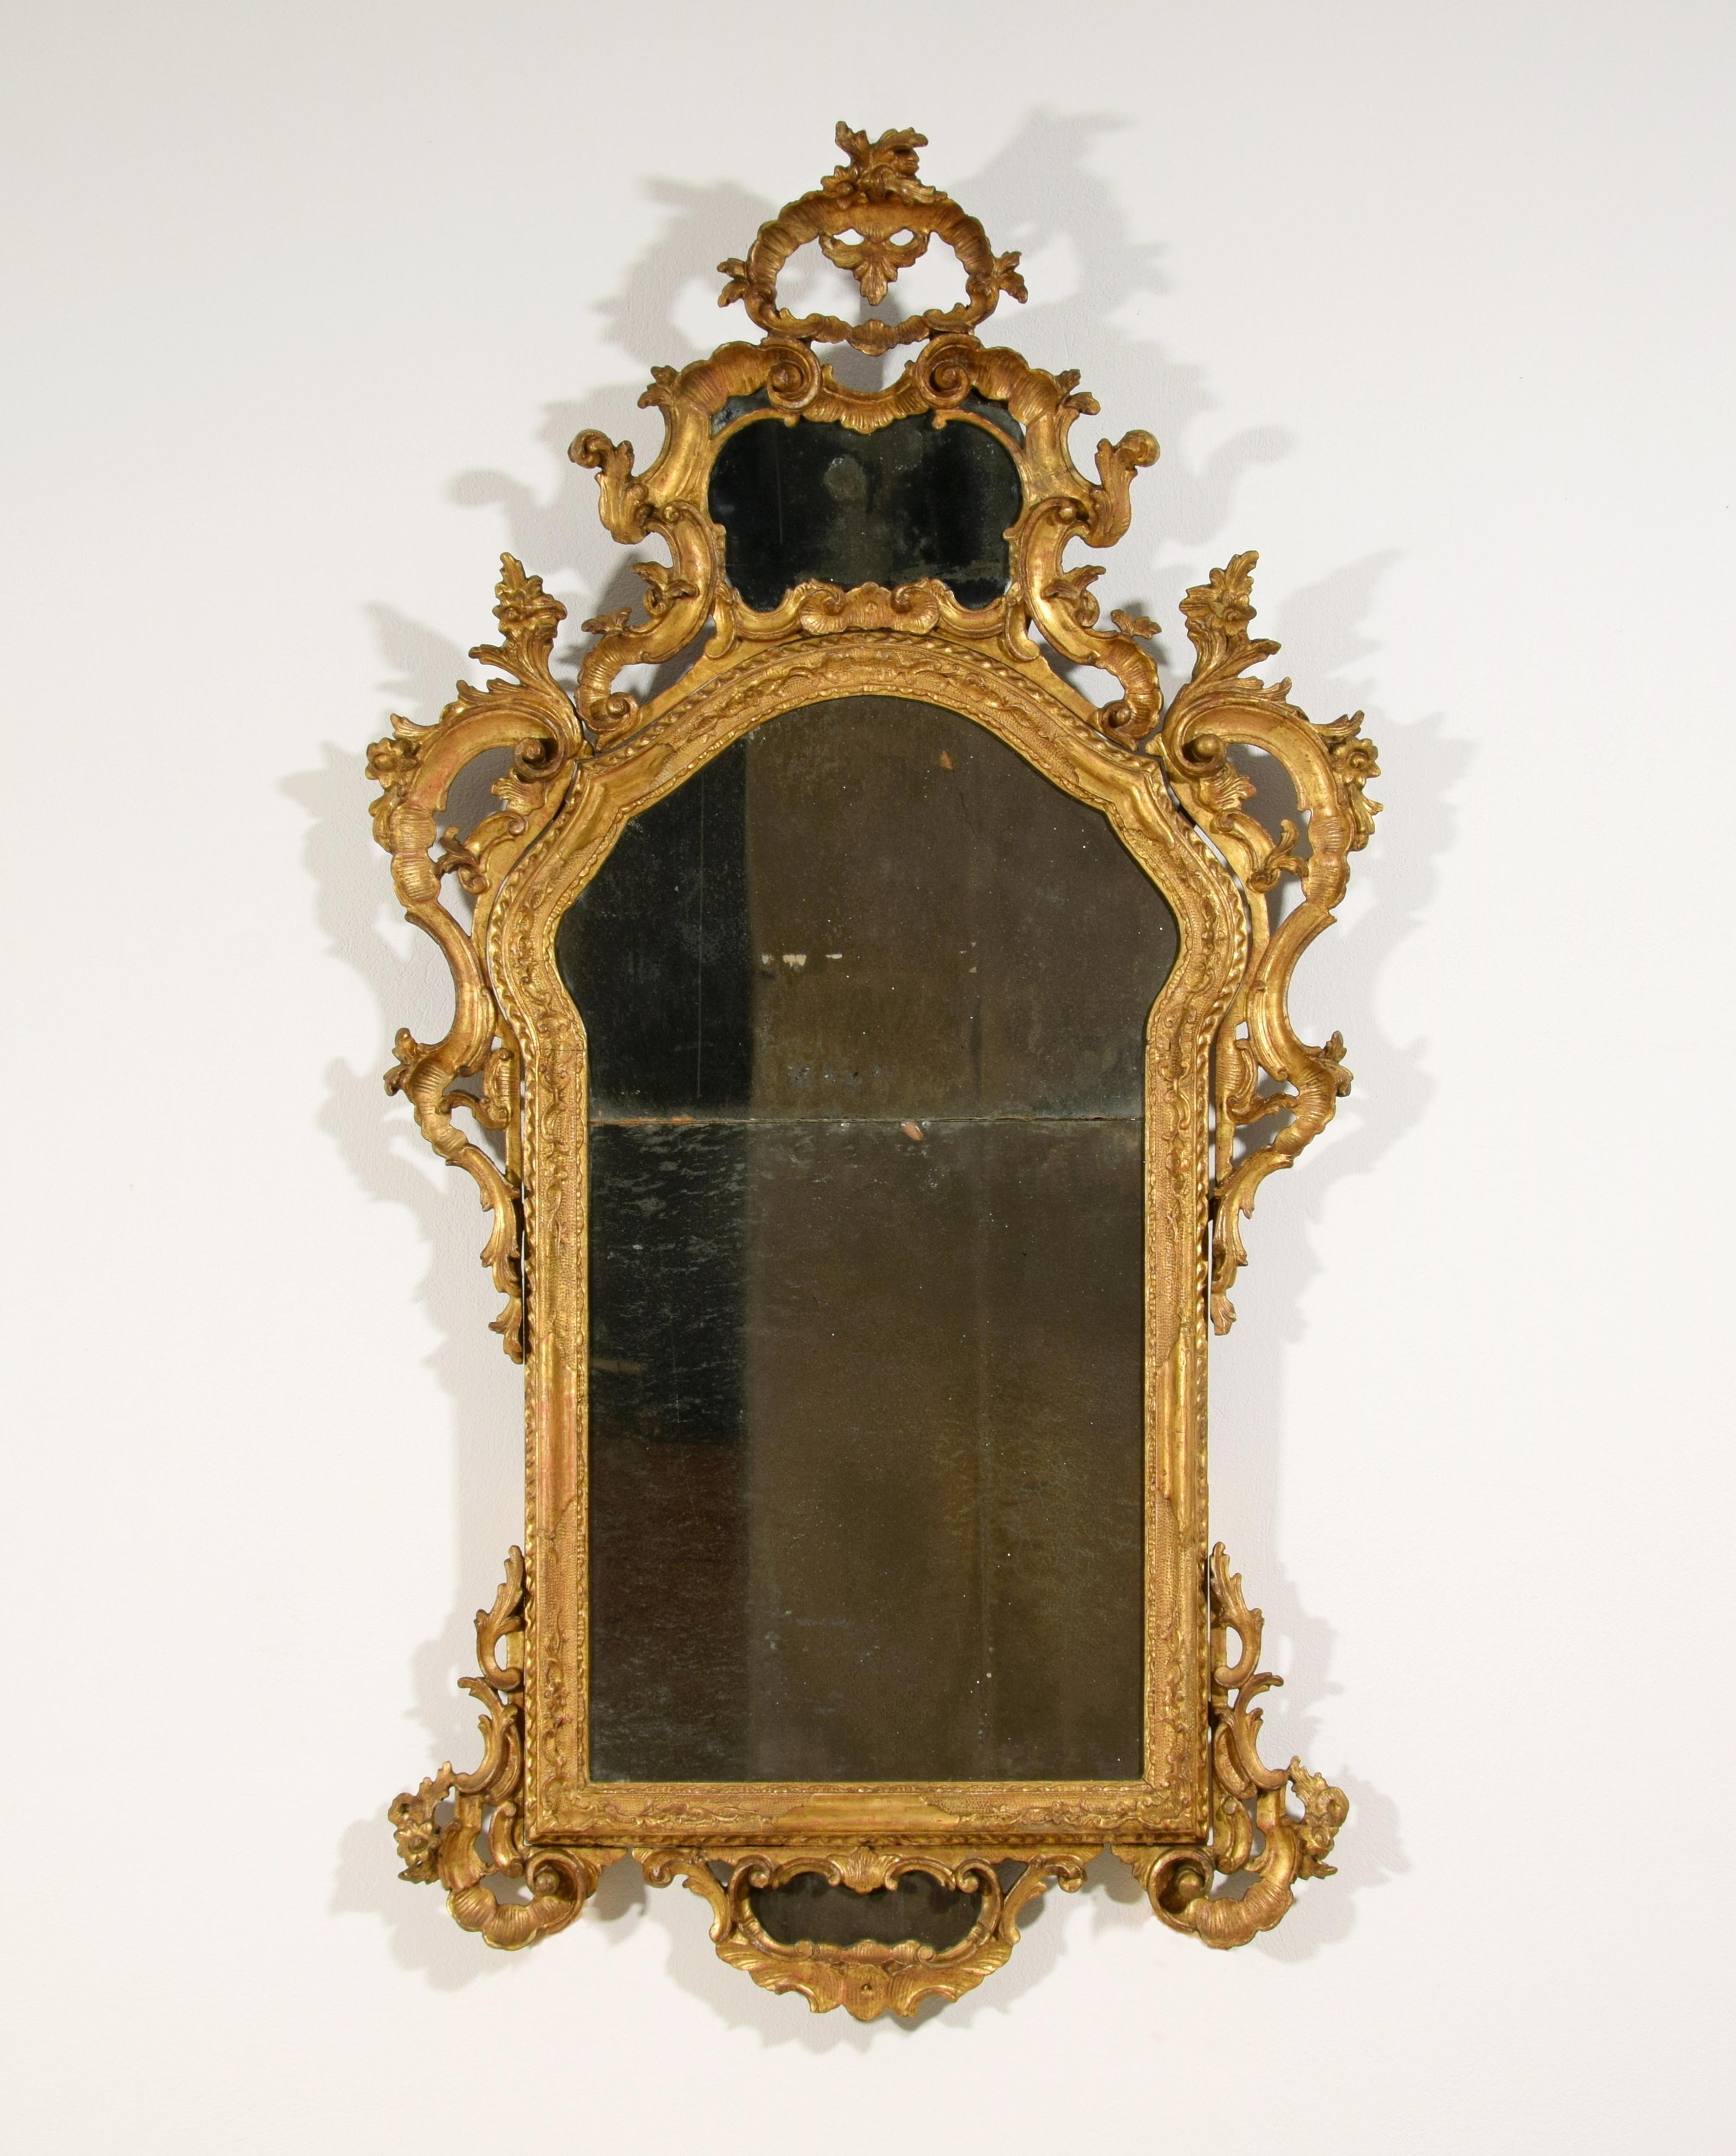 18th Century, Venetian Baroque Carved Giltwood mirror

This mirror was made in Venice, Italy, in the second half of the 18th century. The frame, in carved and gilded wood, has the characteristics of the Venetian baroque.
The internal wooden band,